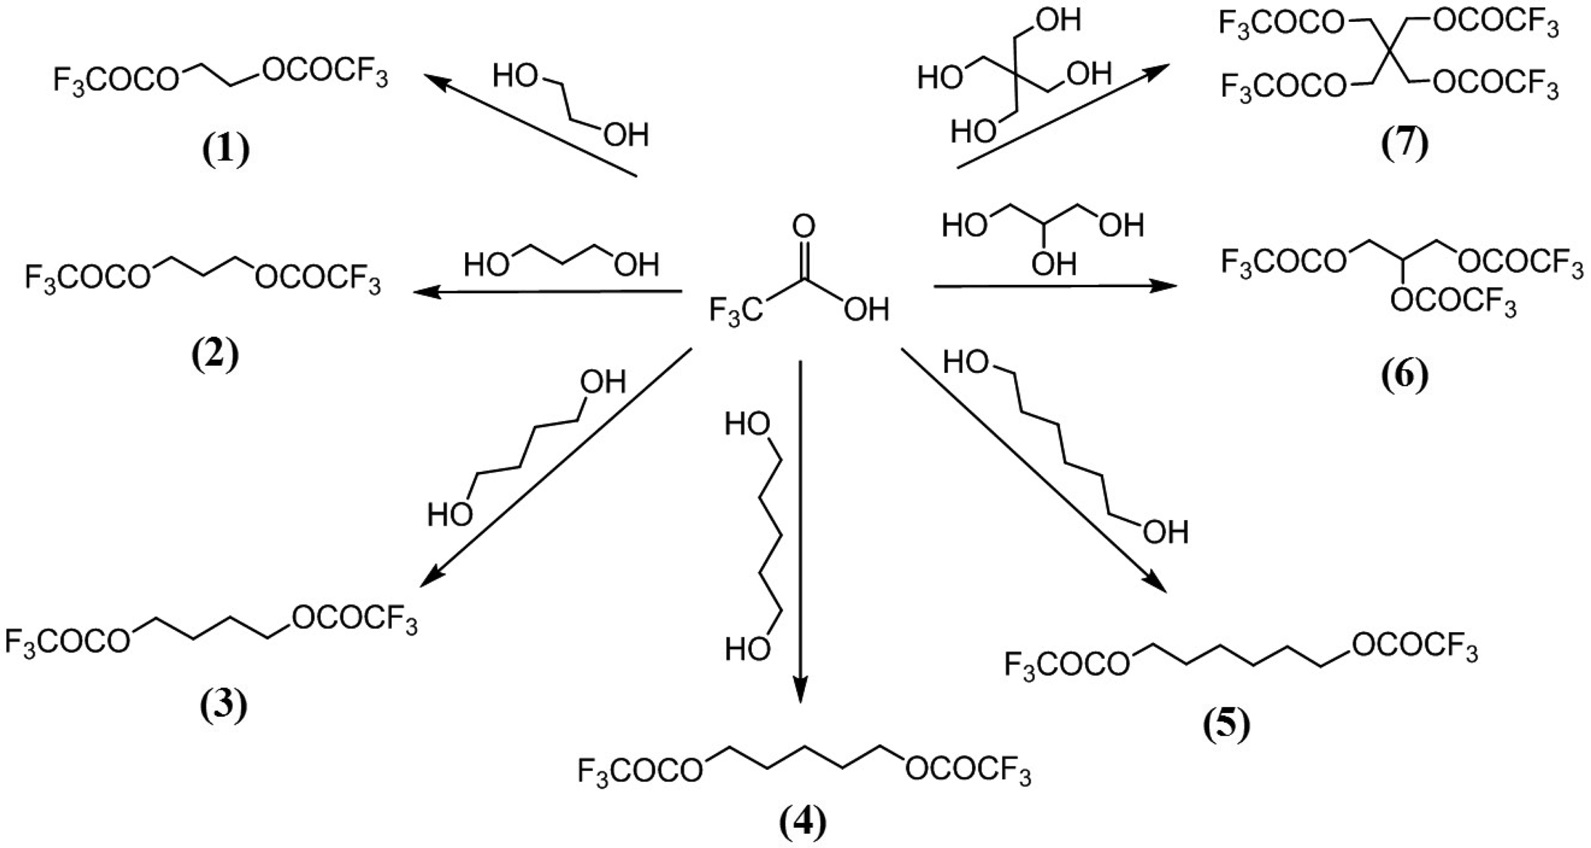 The synthetic scheme of compounds (1-7) from TFA.